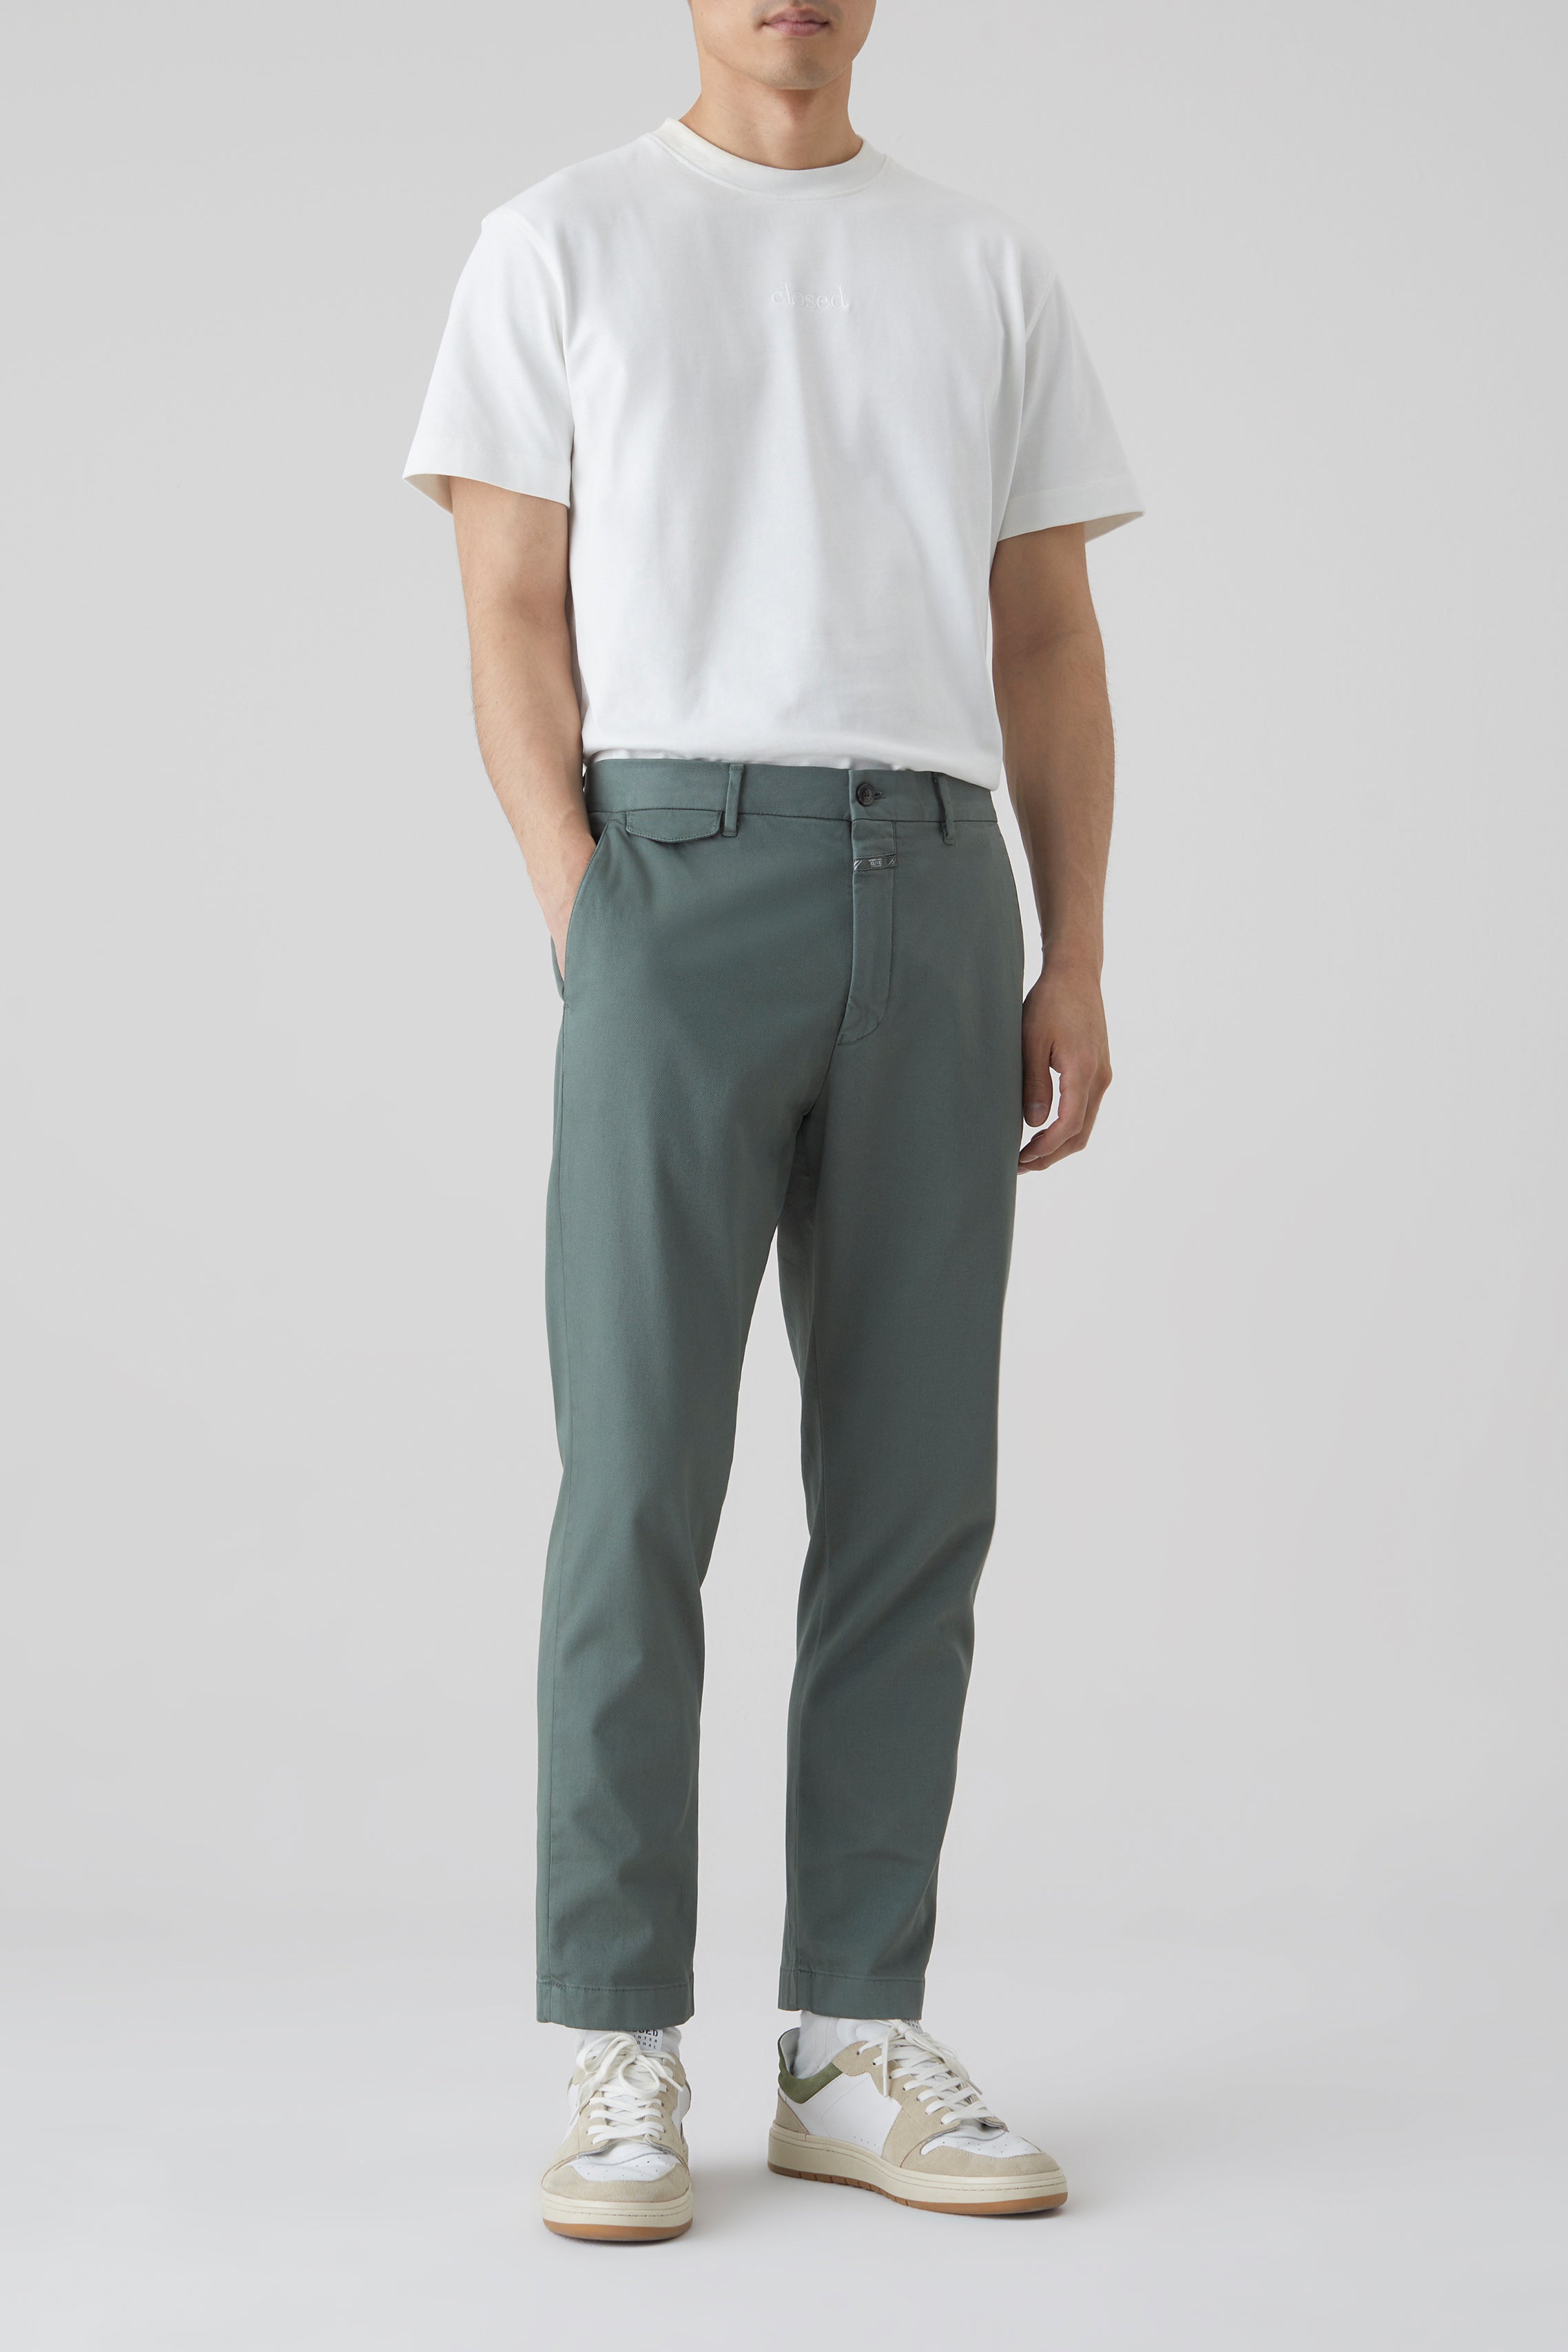 STYLE NAME ATELIER TAPERED PANTS